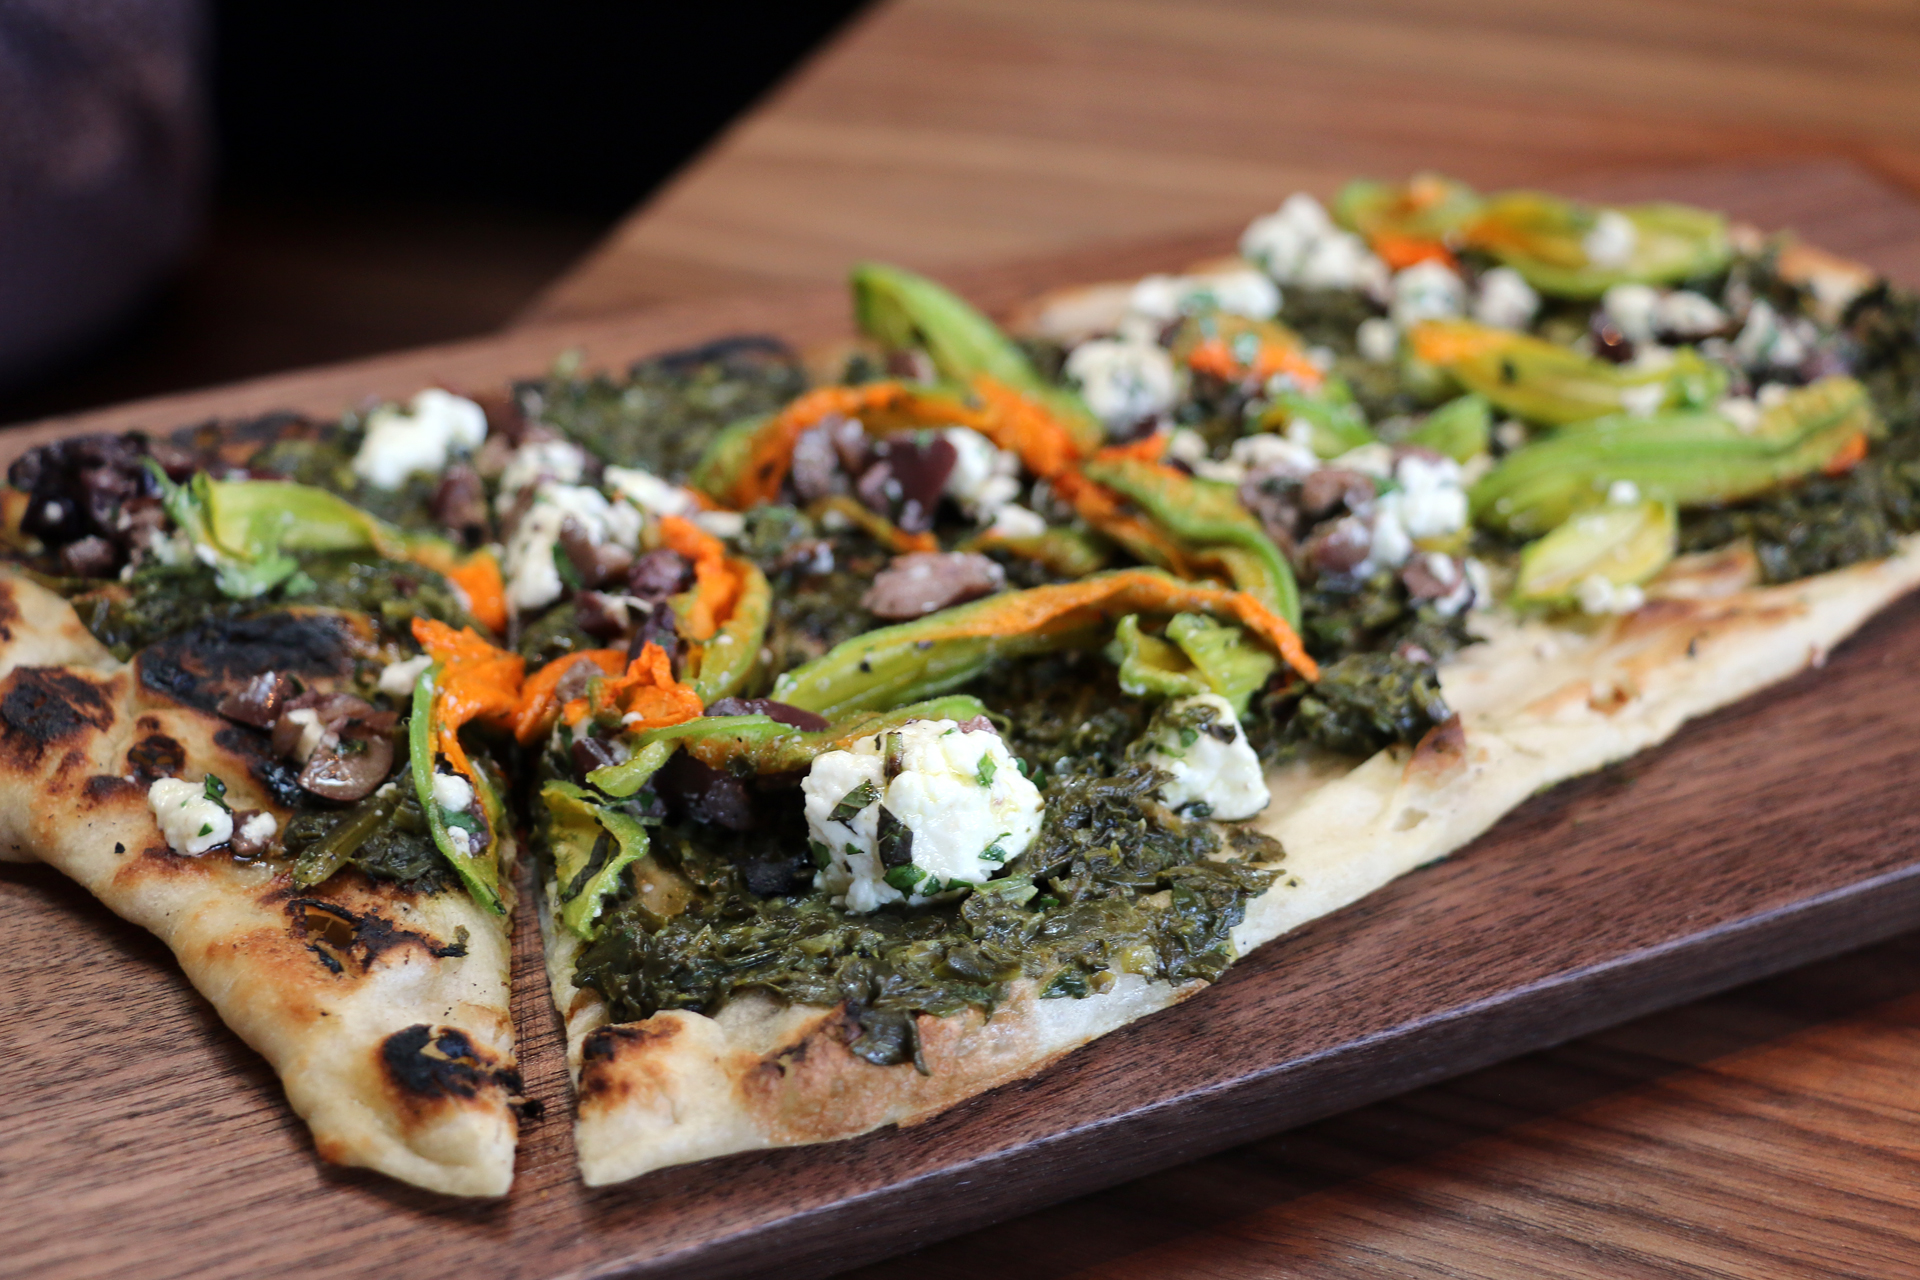 Flatbread with spinach, feta, squash blossoms, and olives from the wood-burning oven.